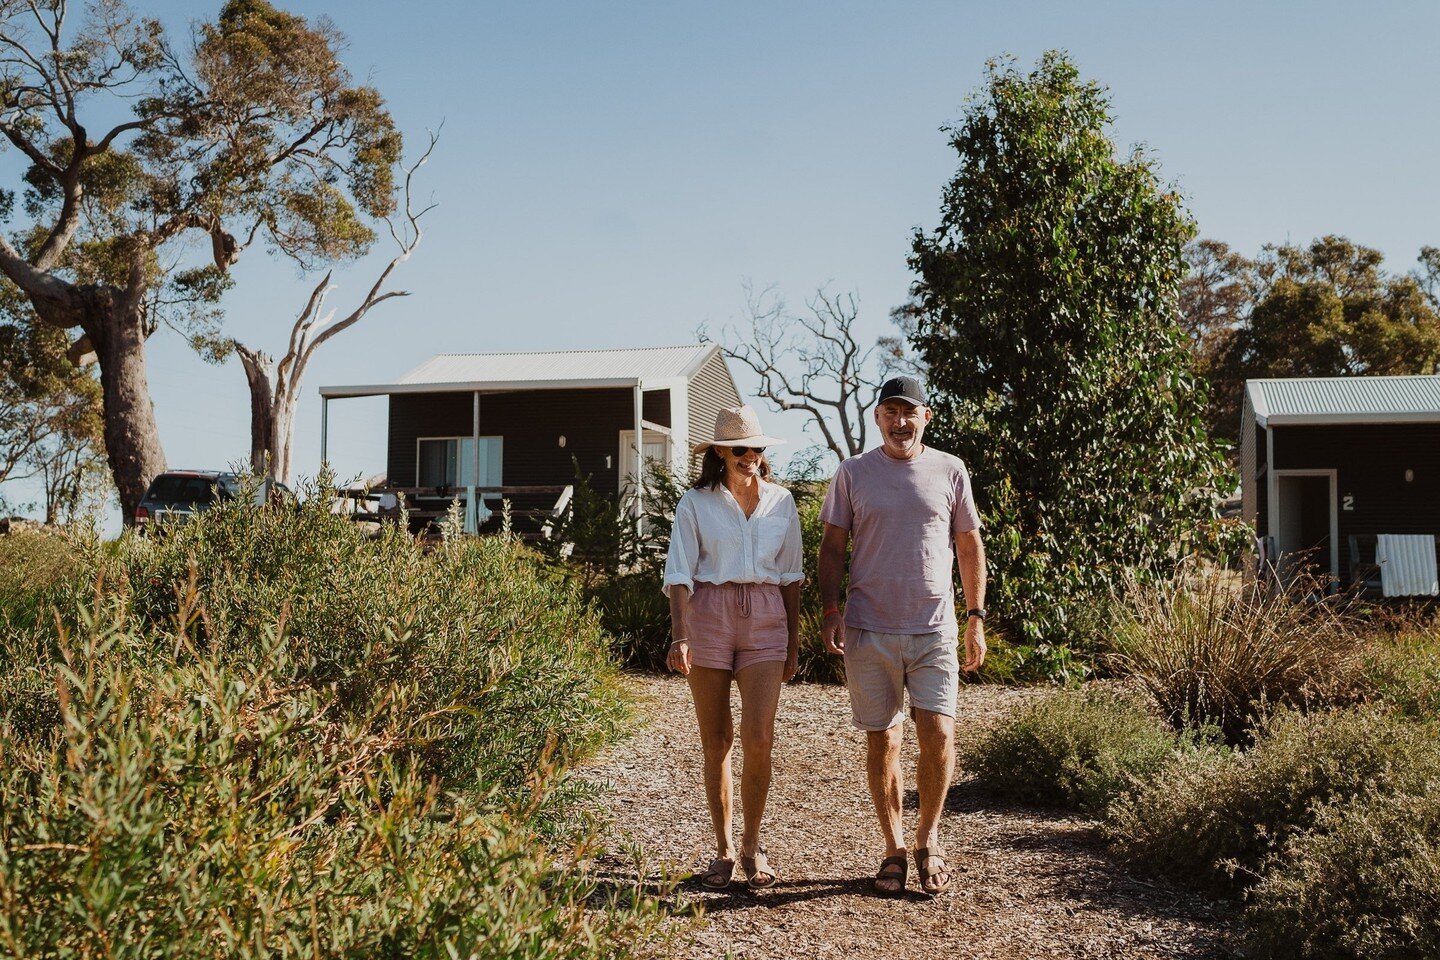 April marks the beginning of Djeran, the Noongar season known for its warm days and cool nights. It&rsquo;s the ideal time to escape the city's hustle and bustle and immerse yourself in the natural beauty of the Great Southern.⁠
⁠
Whether you're plan